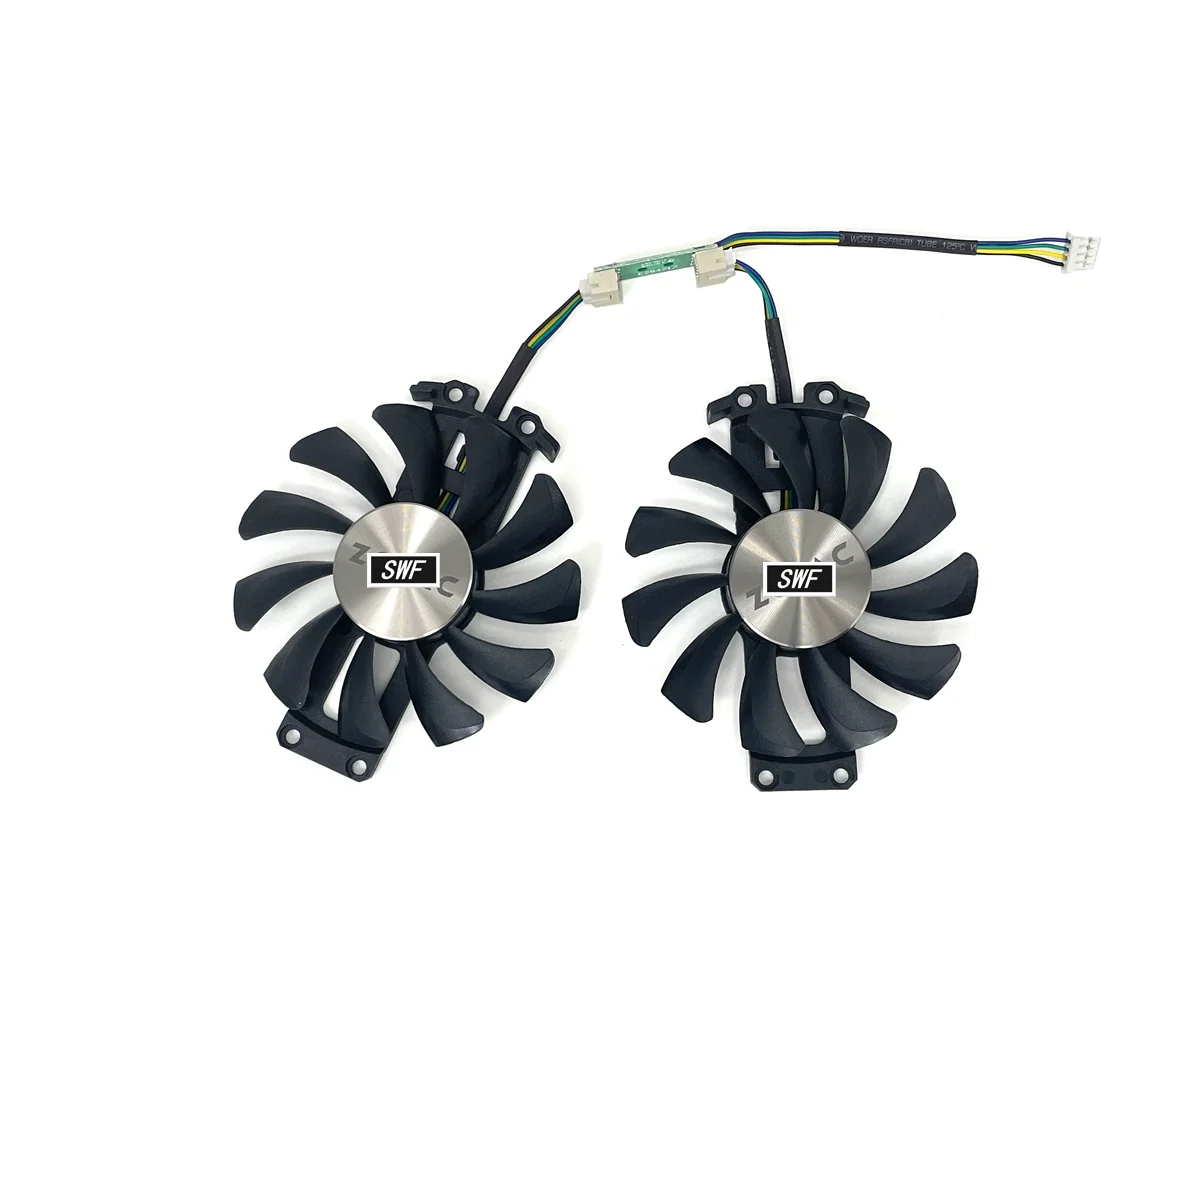 New GA81S2U 12V 0.38A 75mm 4Pin GTX 960 Cooler Fan For ZOTAC GTX 960 Graphics Video Card Cooling Fan